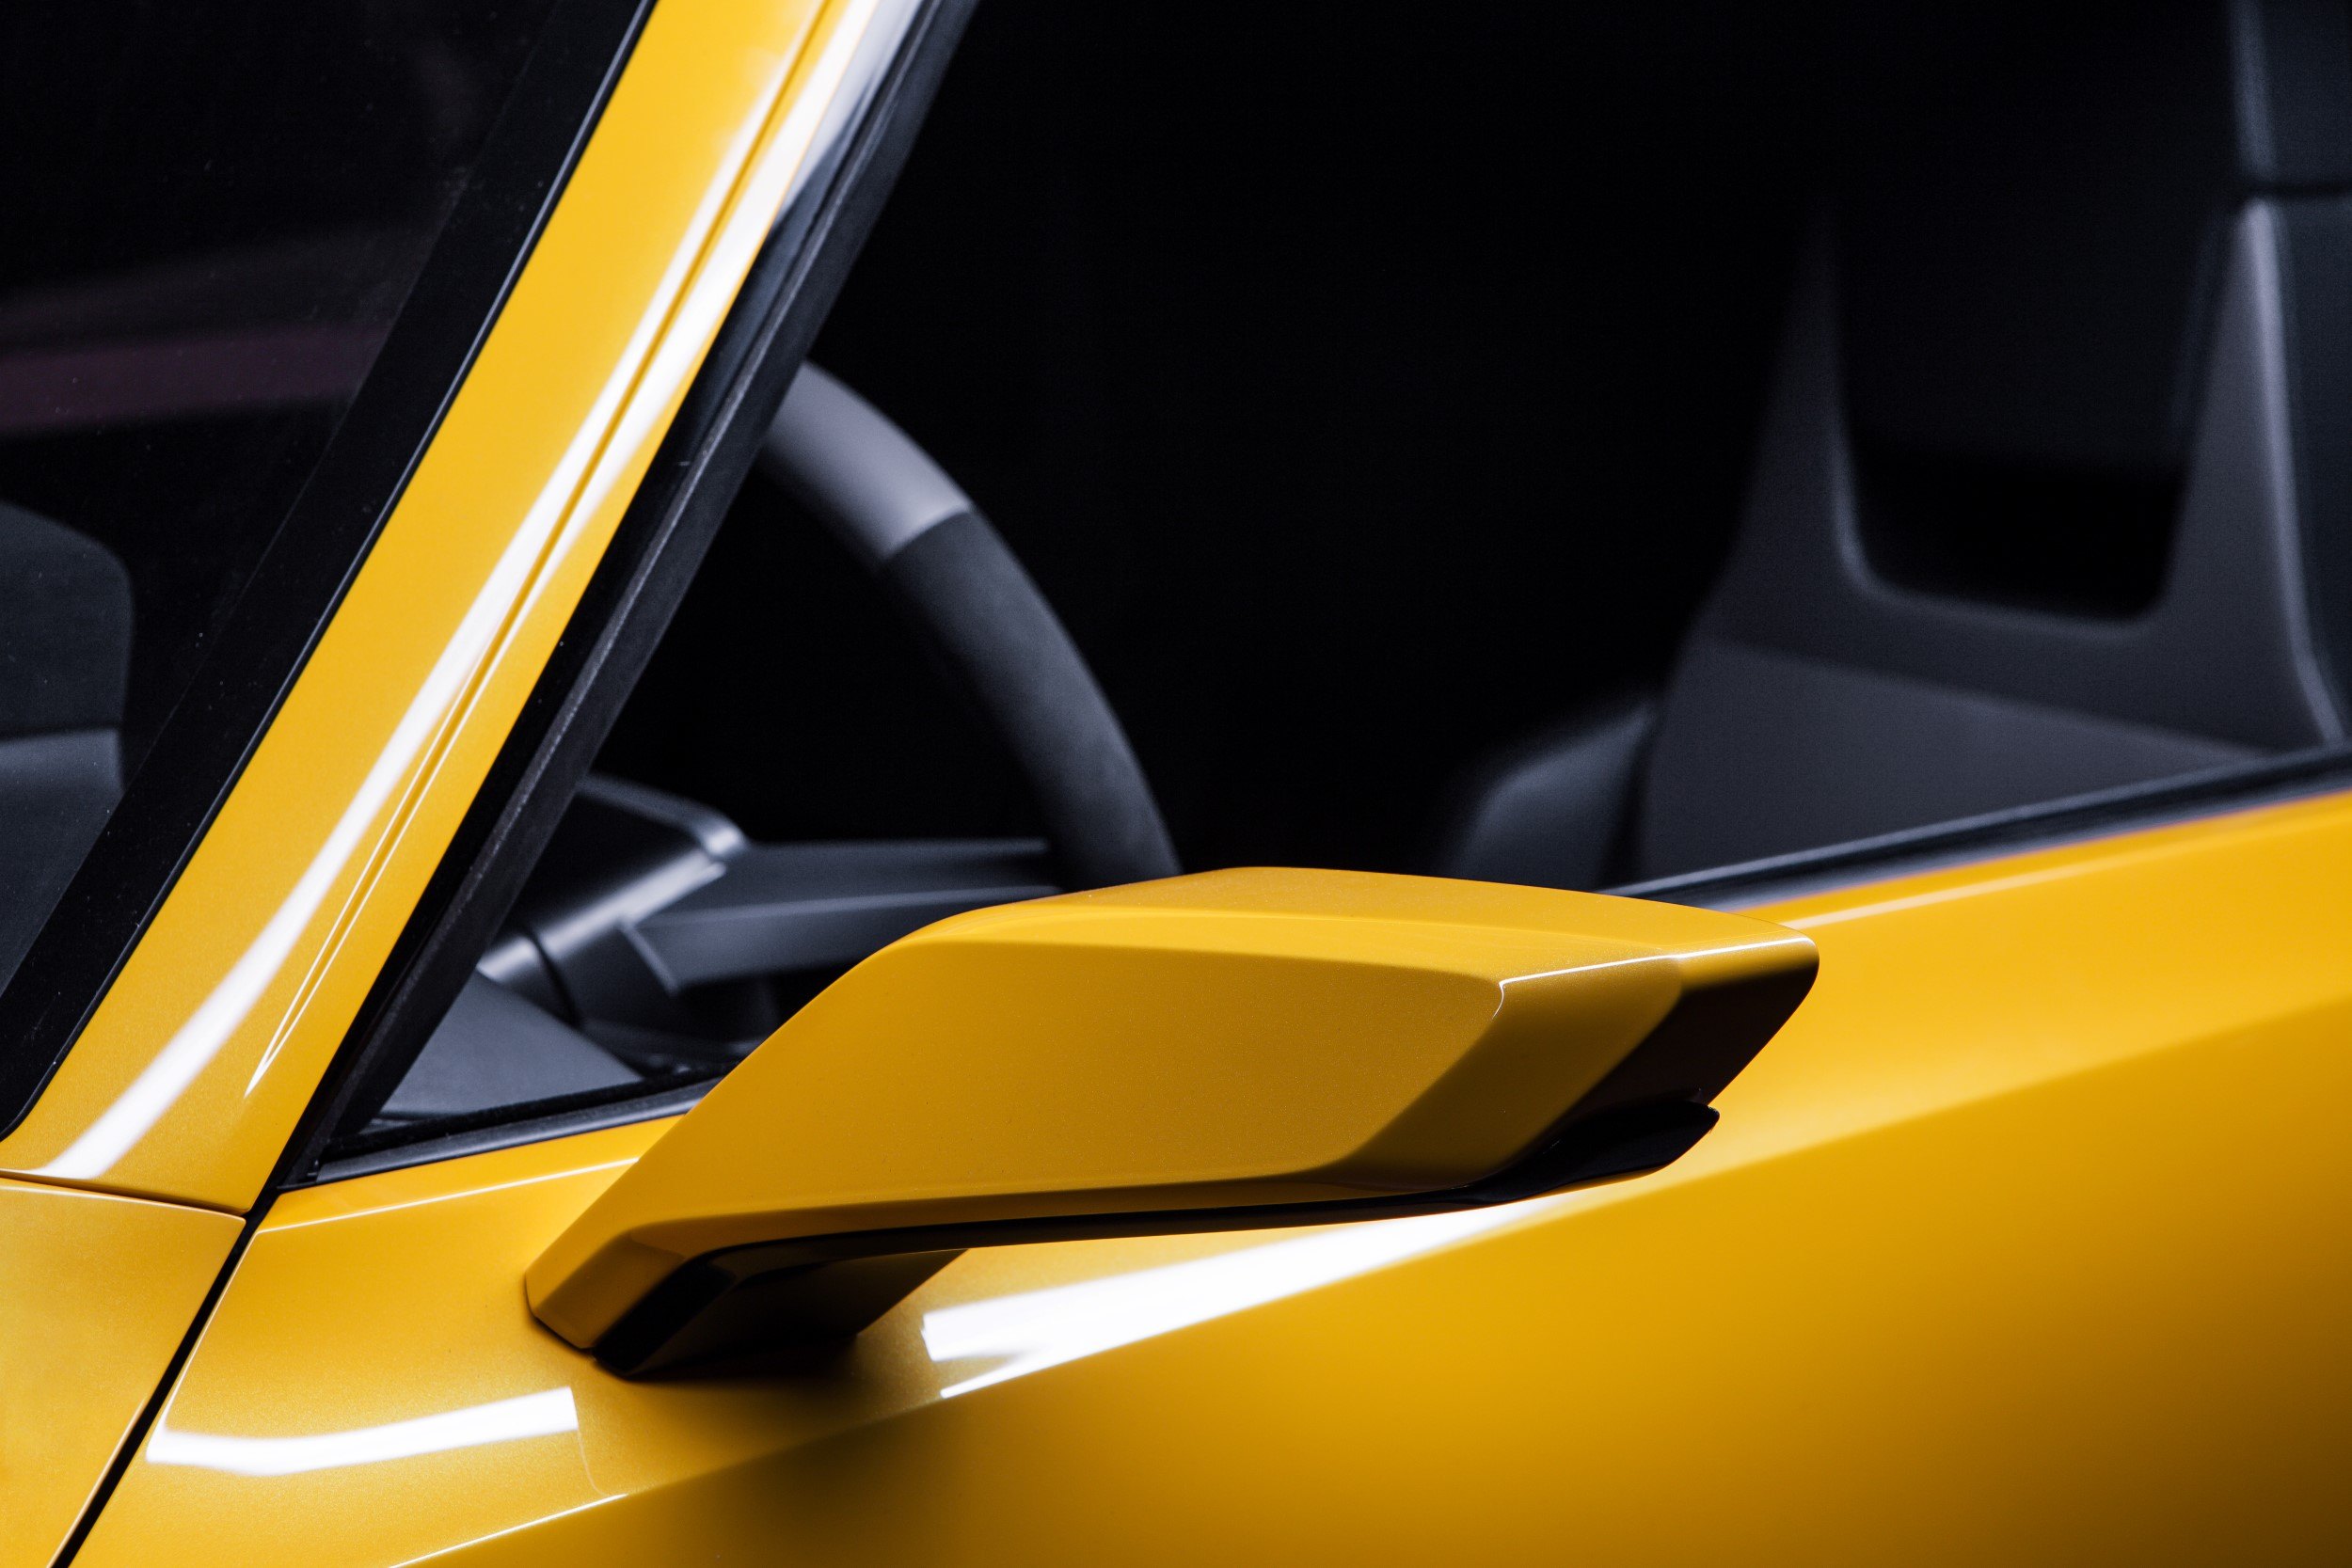 Aftermarket Side Mirrors on Yellow Chevy Camaro - Photo by Roadster Shop